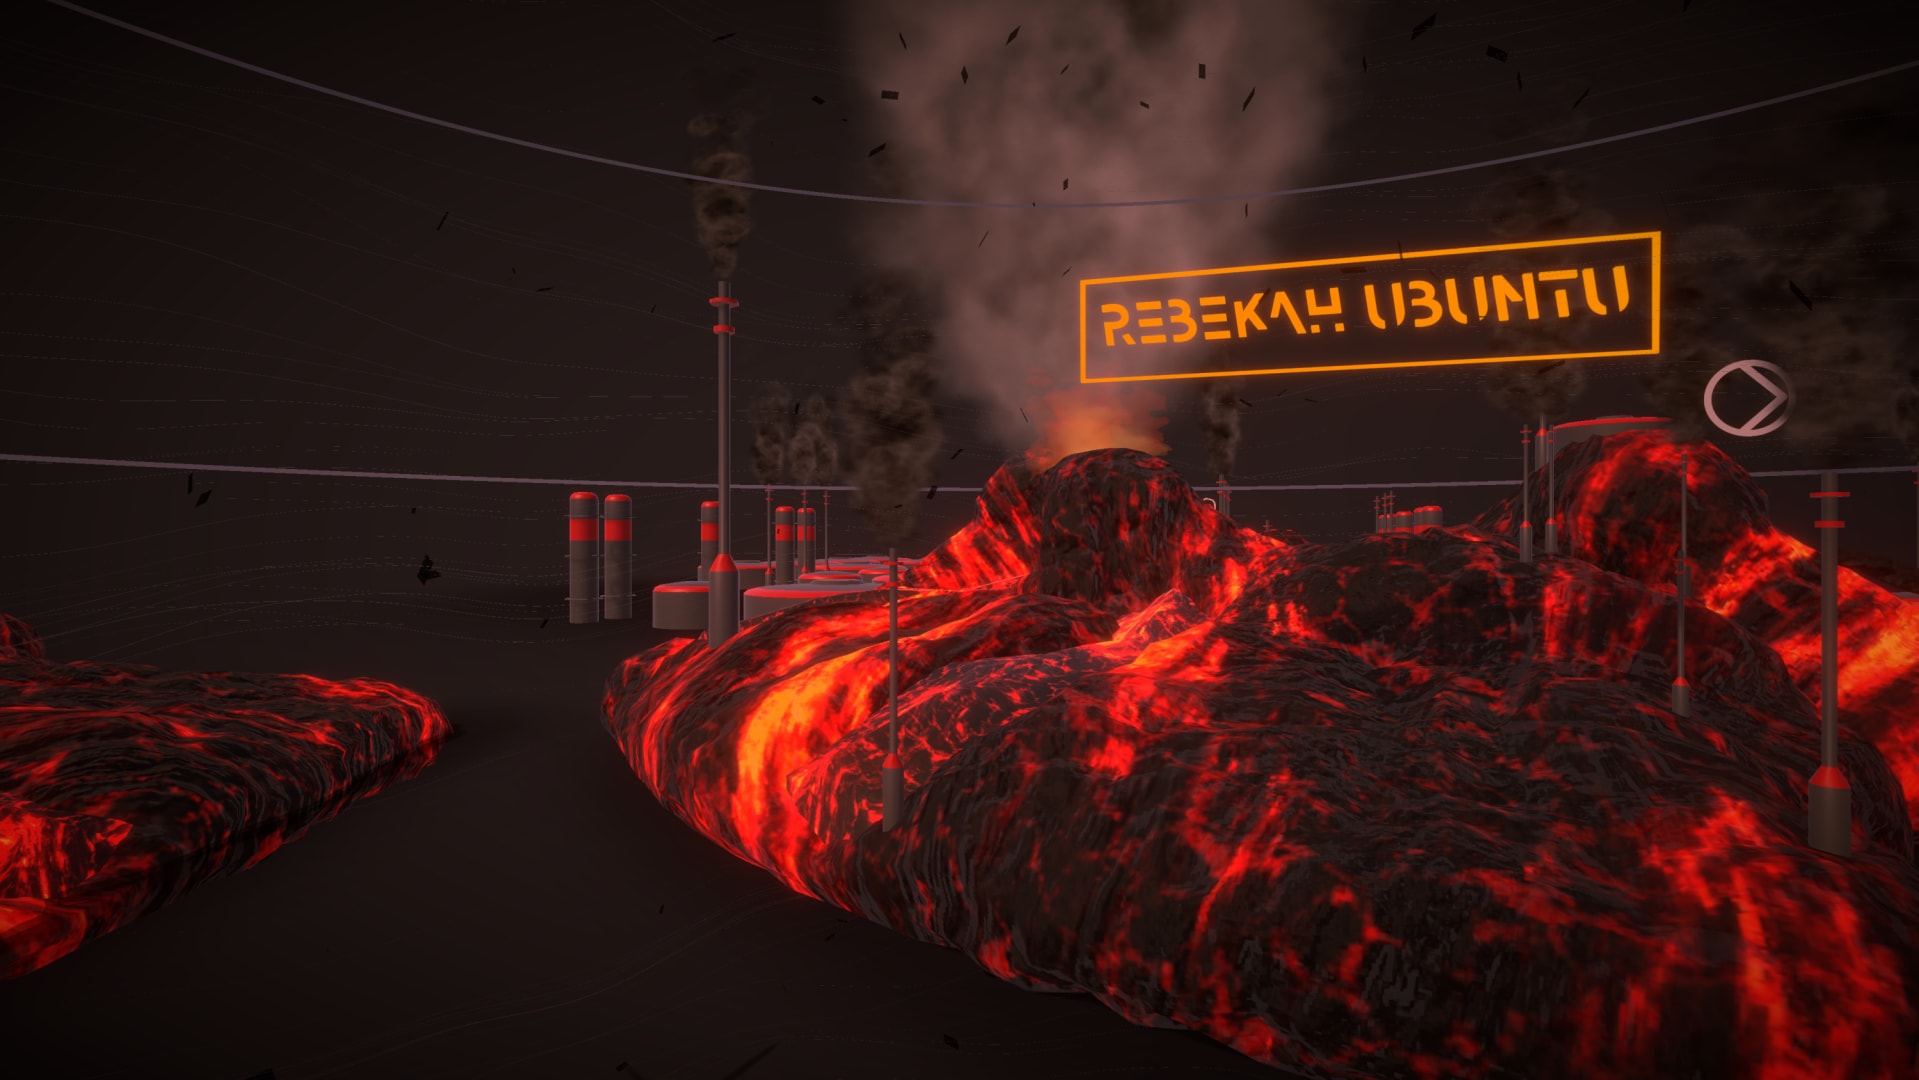 A dark and dangerous landscape. Flowing red lava oozes over dark rocks. A power plant of some kind is visible on the horizon. On the right of the image, Rebekahs name is lit up in neon-like lights.